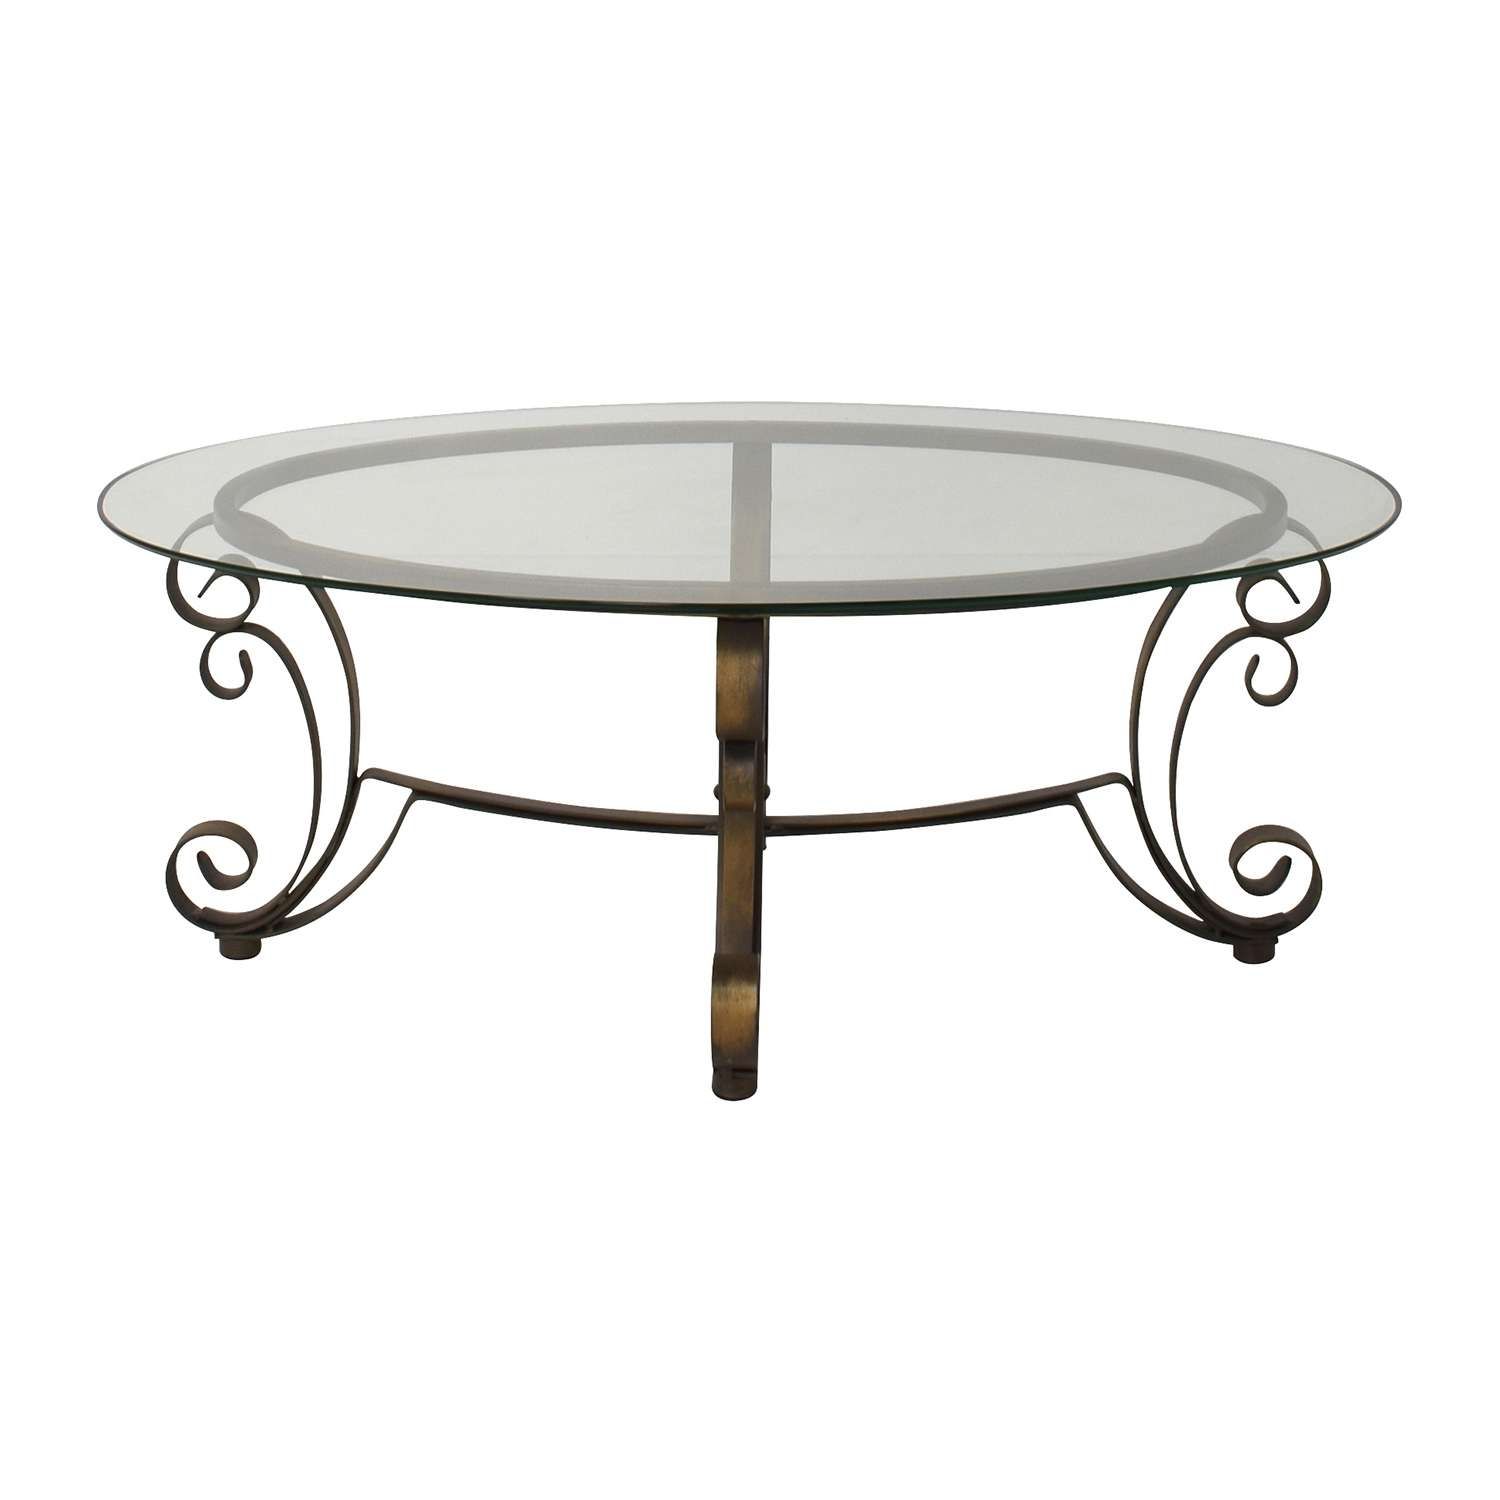 [%2017 Metal Oval Coffee Tables Intended For 90% Off – Rooms To Go Rooms To Go Metal Oval Coffee Table / Tables|90% Off – Rooms To Go Rooms To Go Metal Oval Coffee Table / Tables Regarding Best And Newest Metal Oval Coffee Tables%] (View 5 of 20)